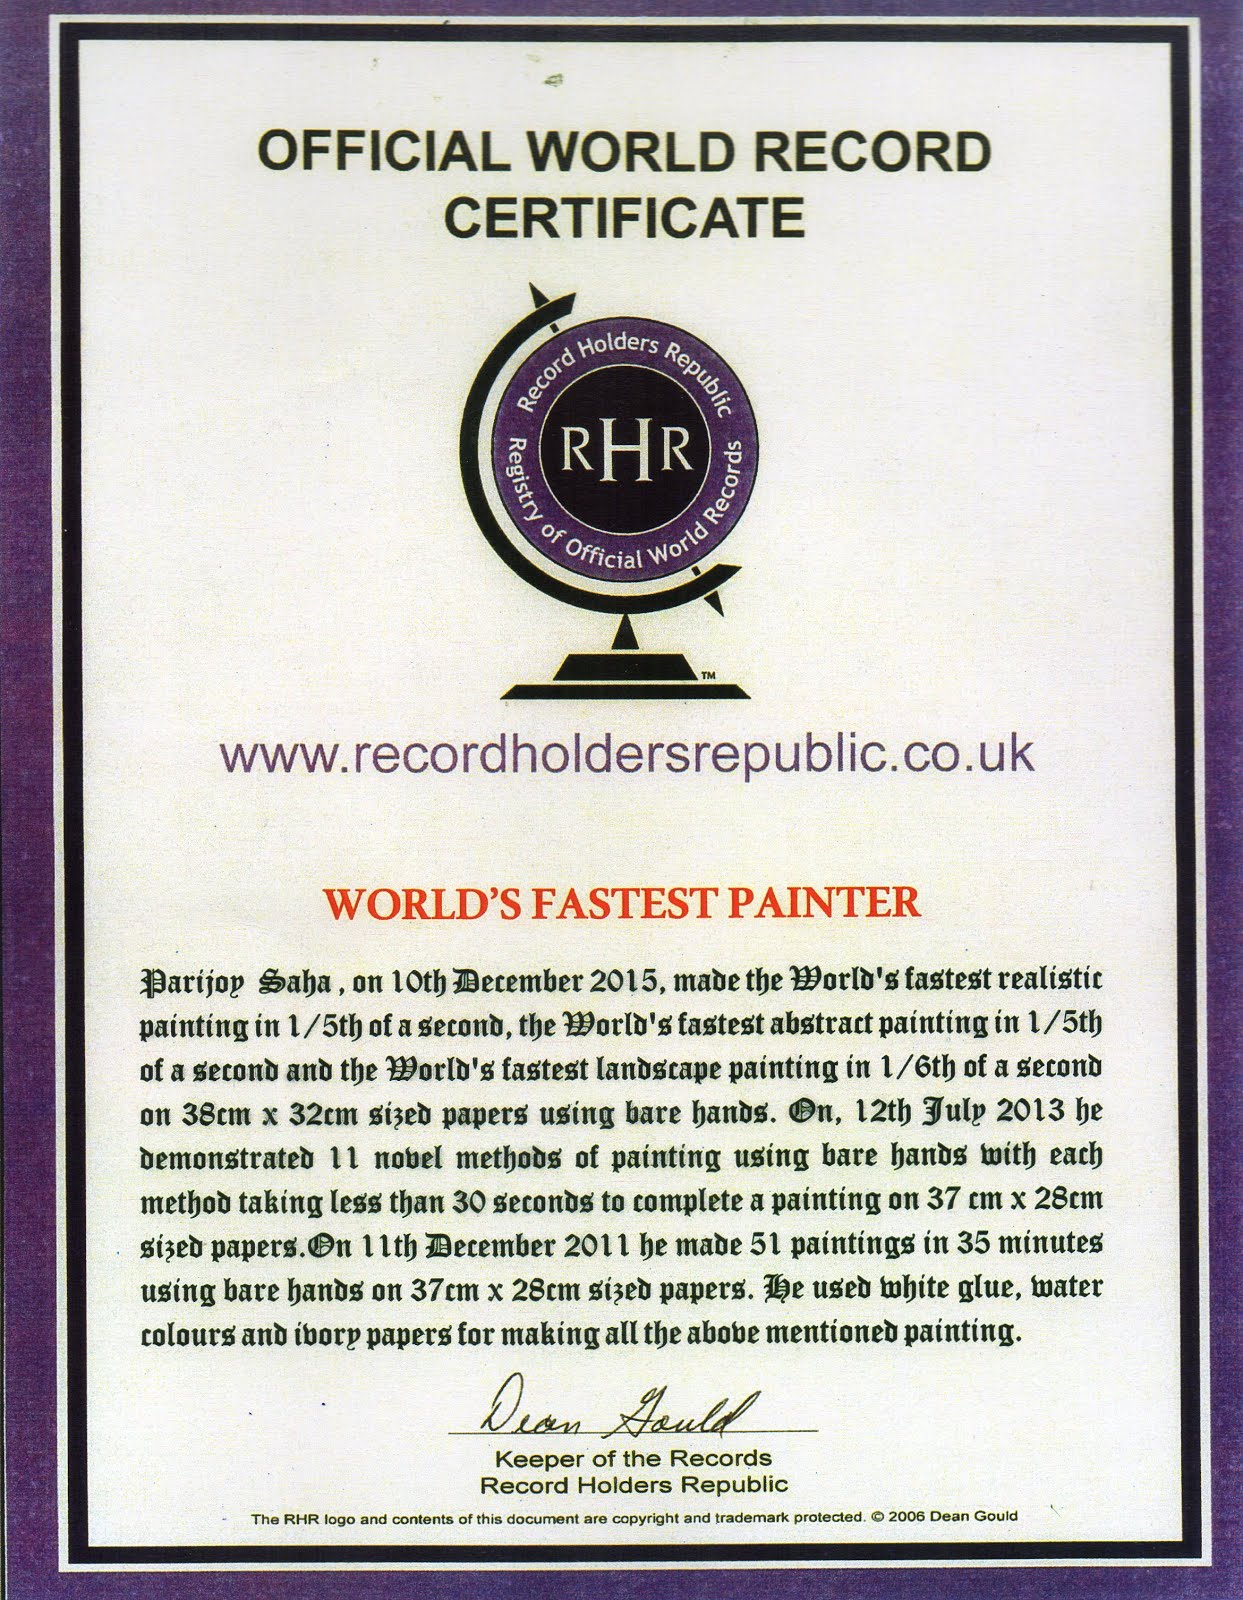 World Record Certificate for World's Fastest Painter